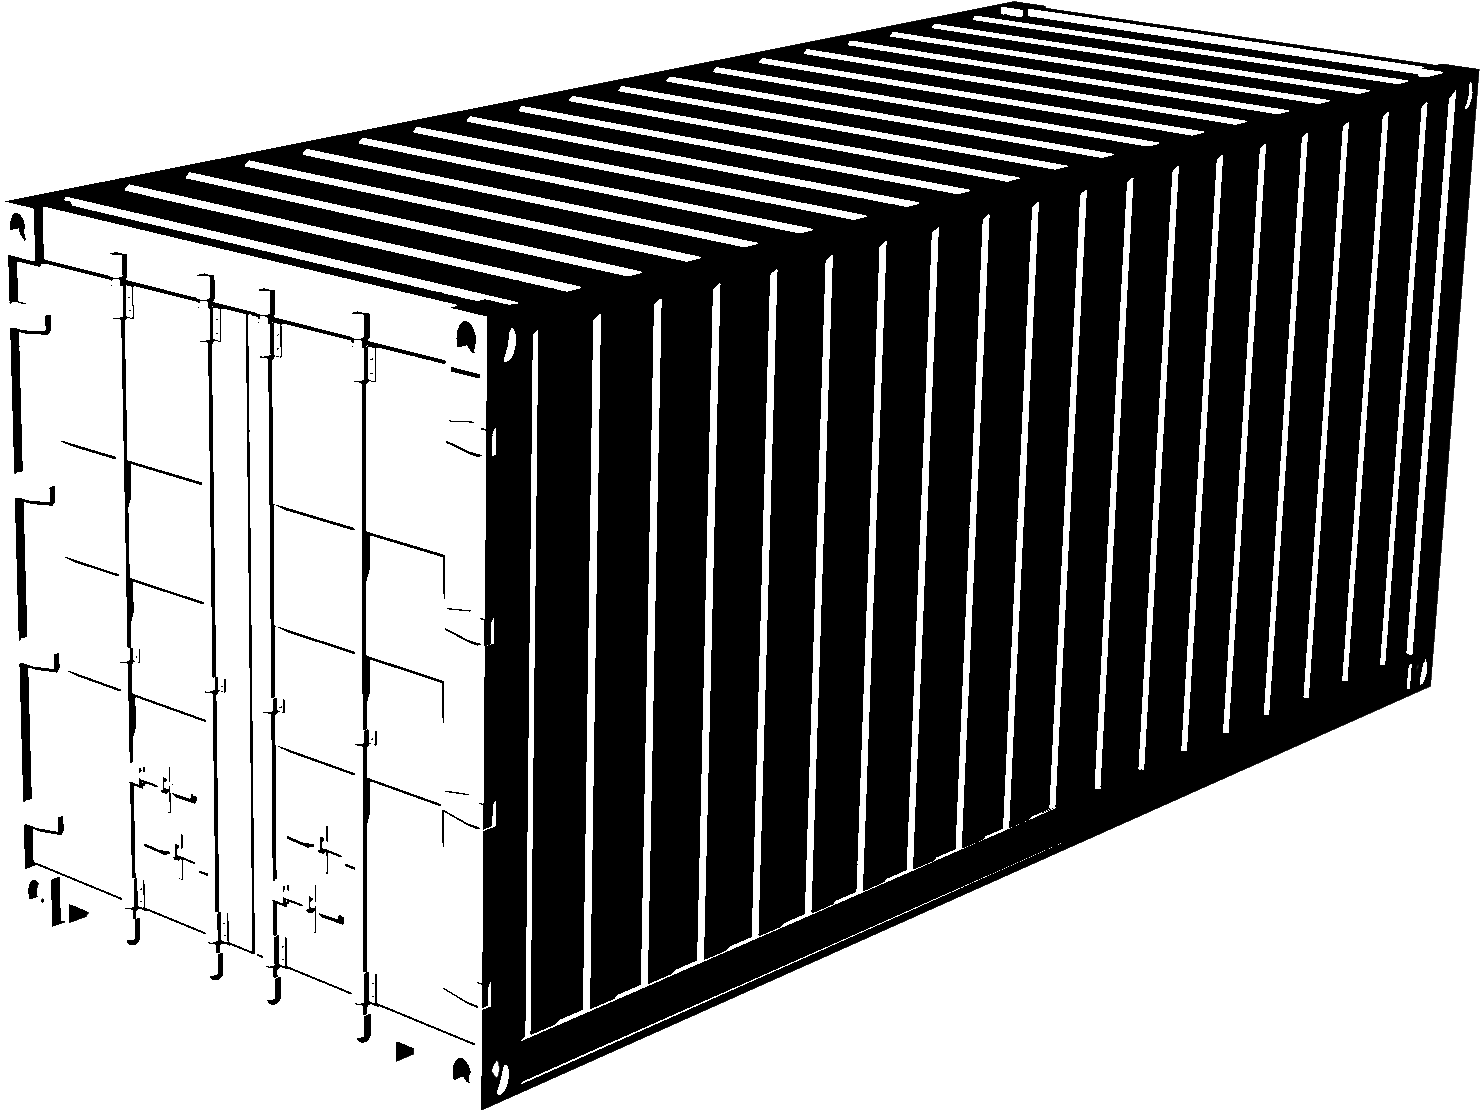 A shipping container.